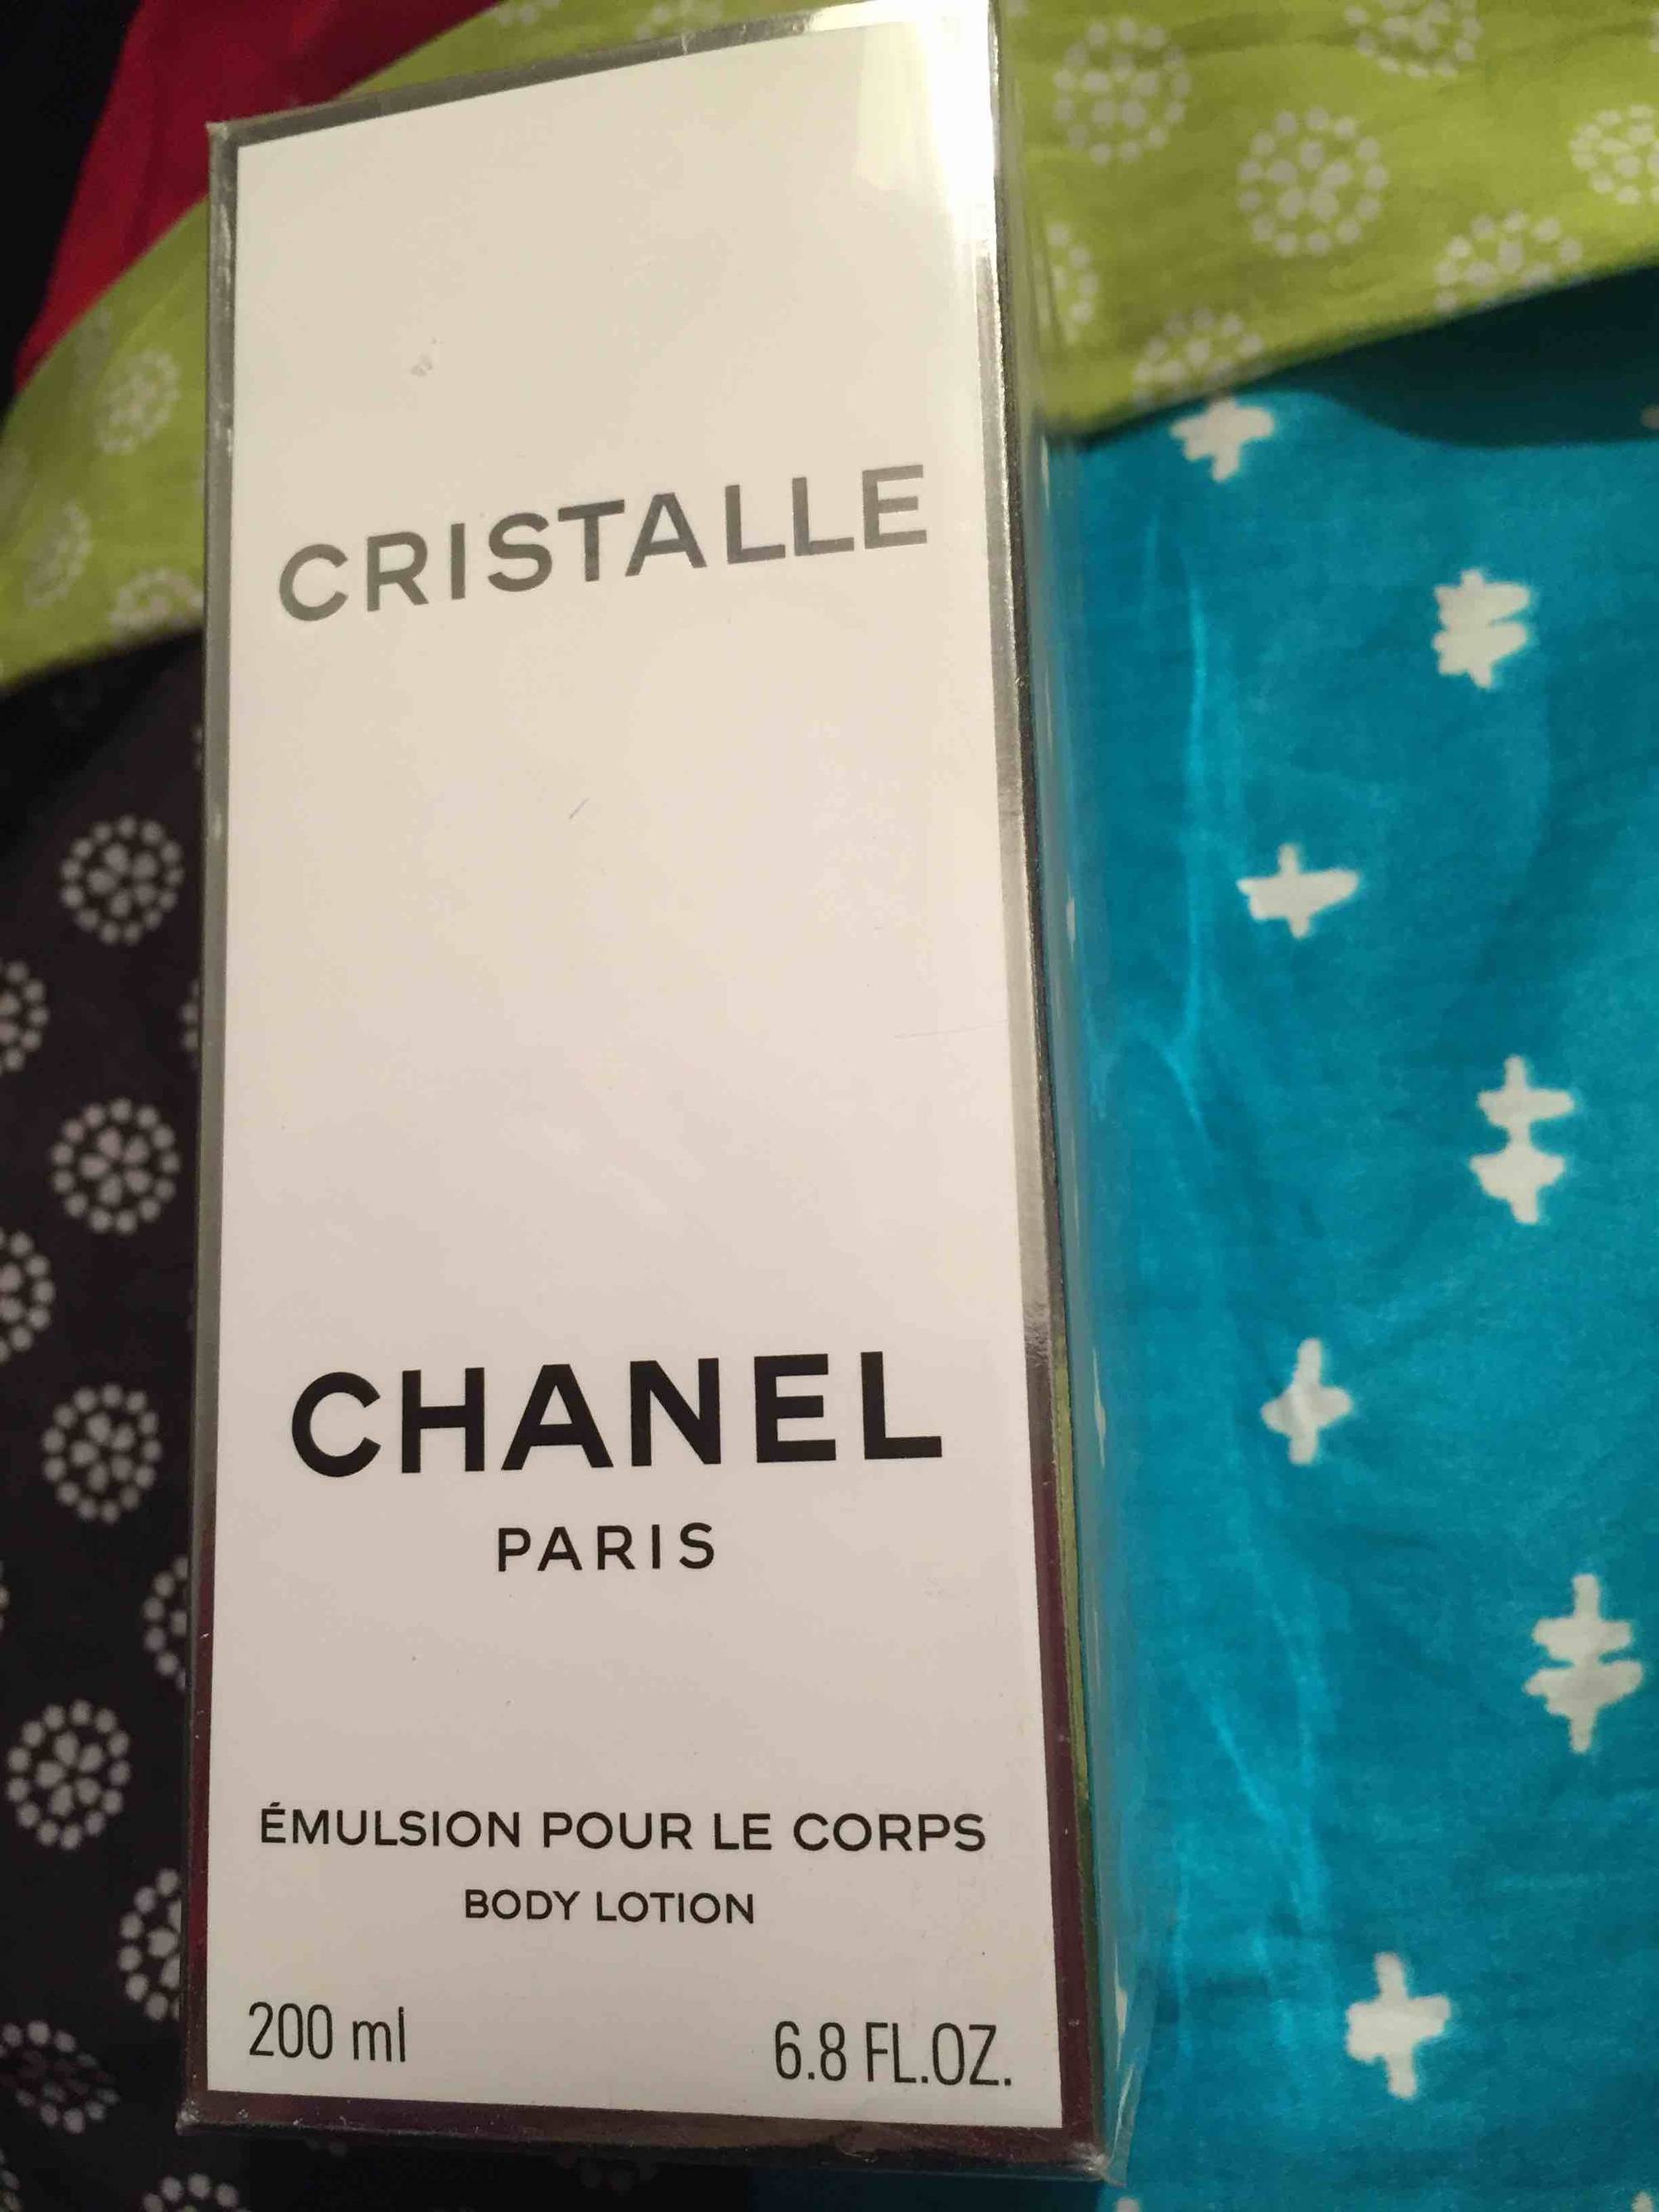 CHANEL - Cristalle - Body lotion